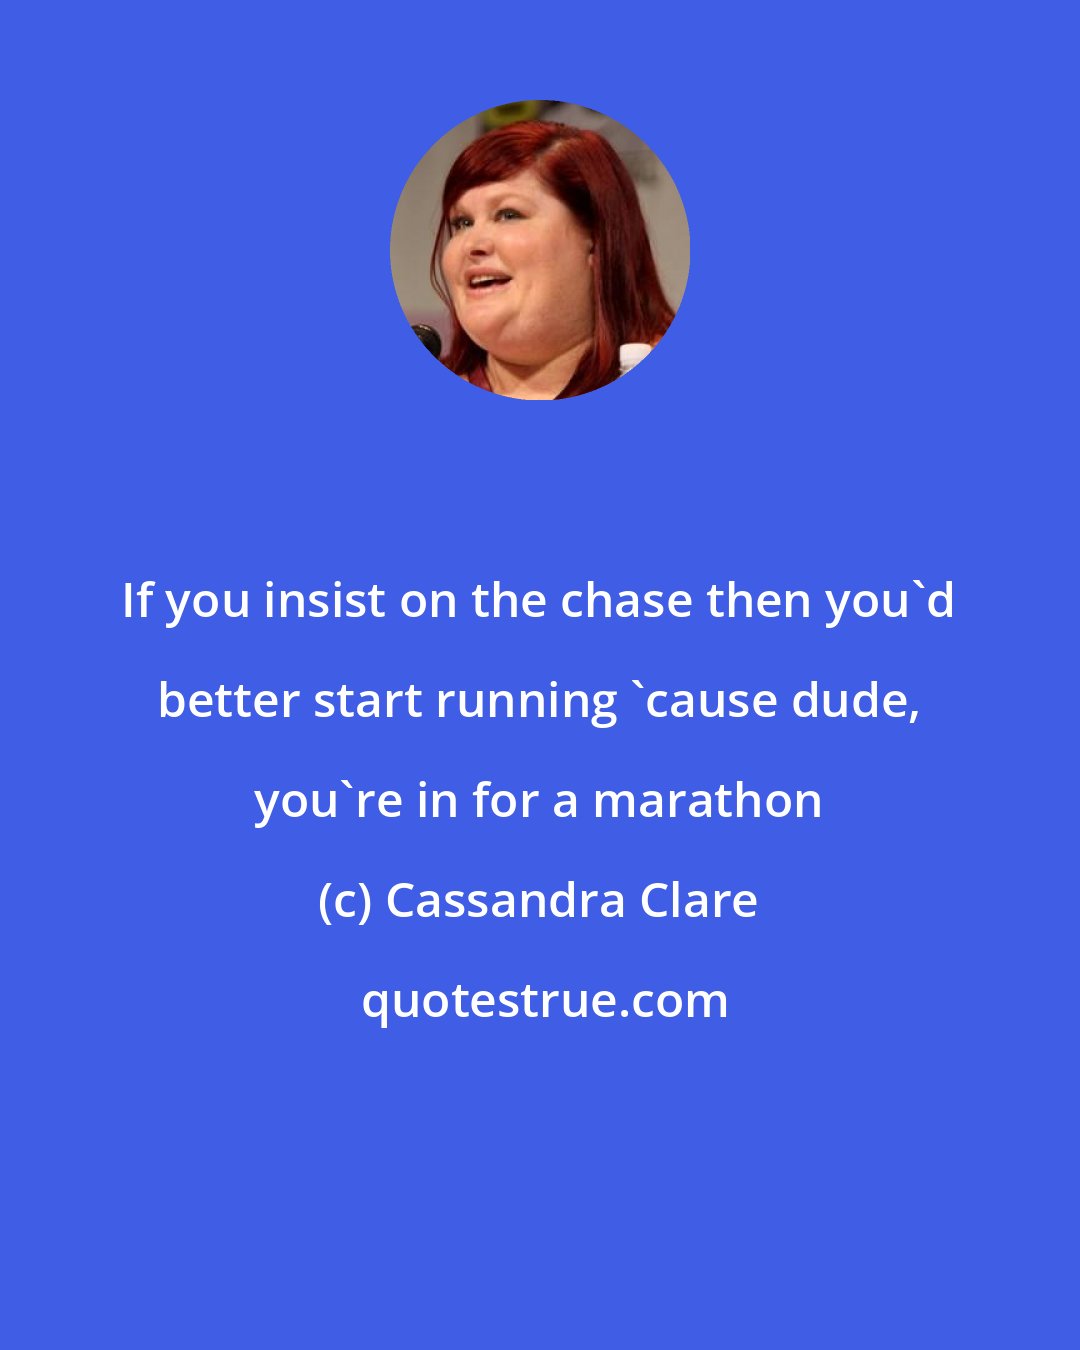 Cassandra Clare: If you insist on the chase then you'd better start running 'cause dude, you're in for a marathon